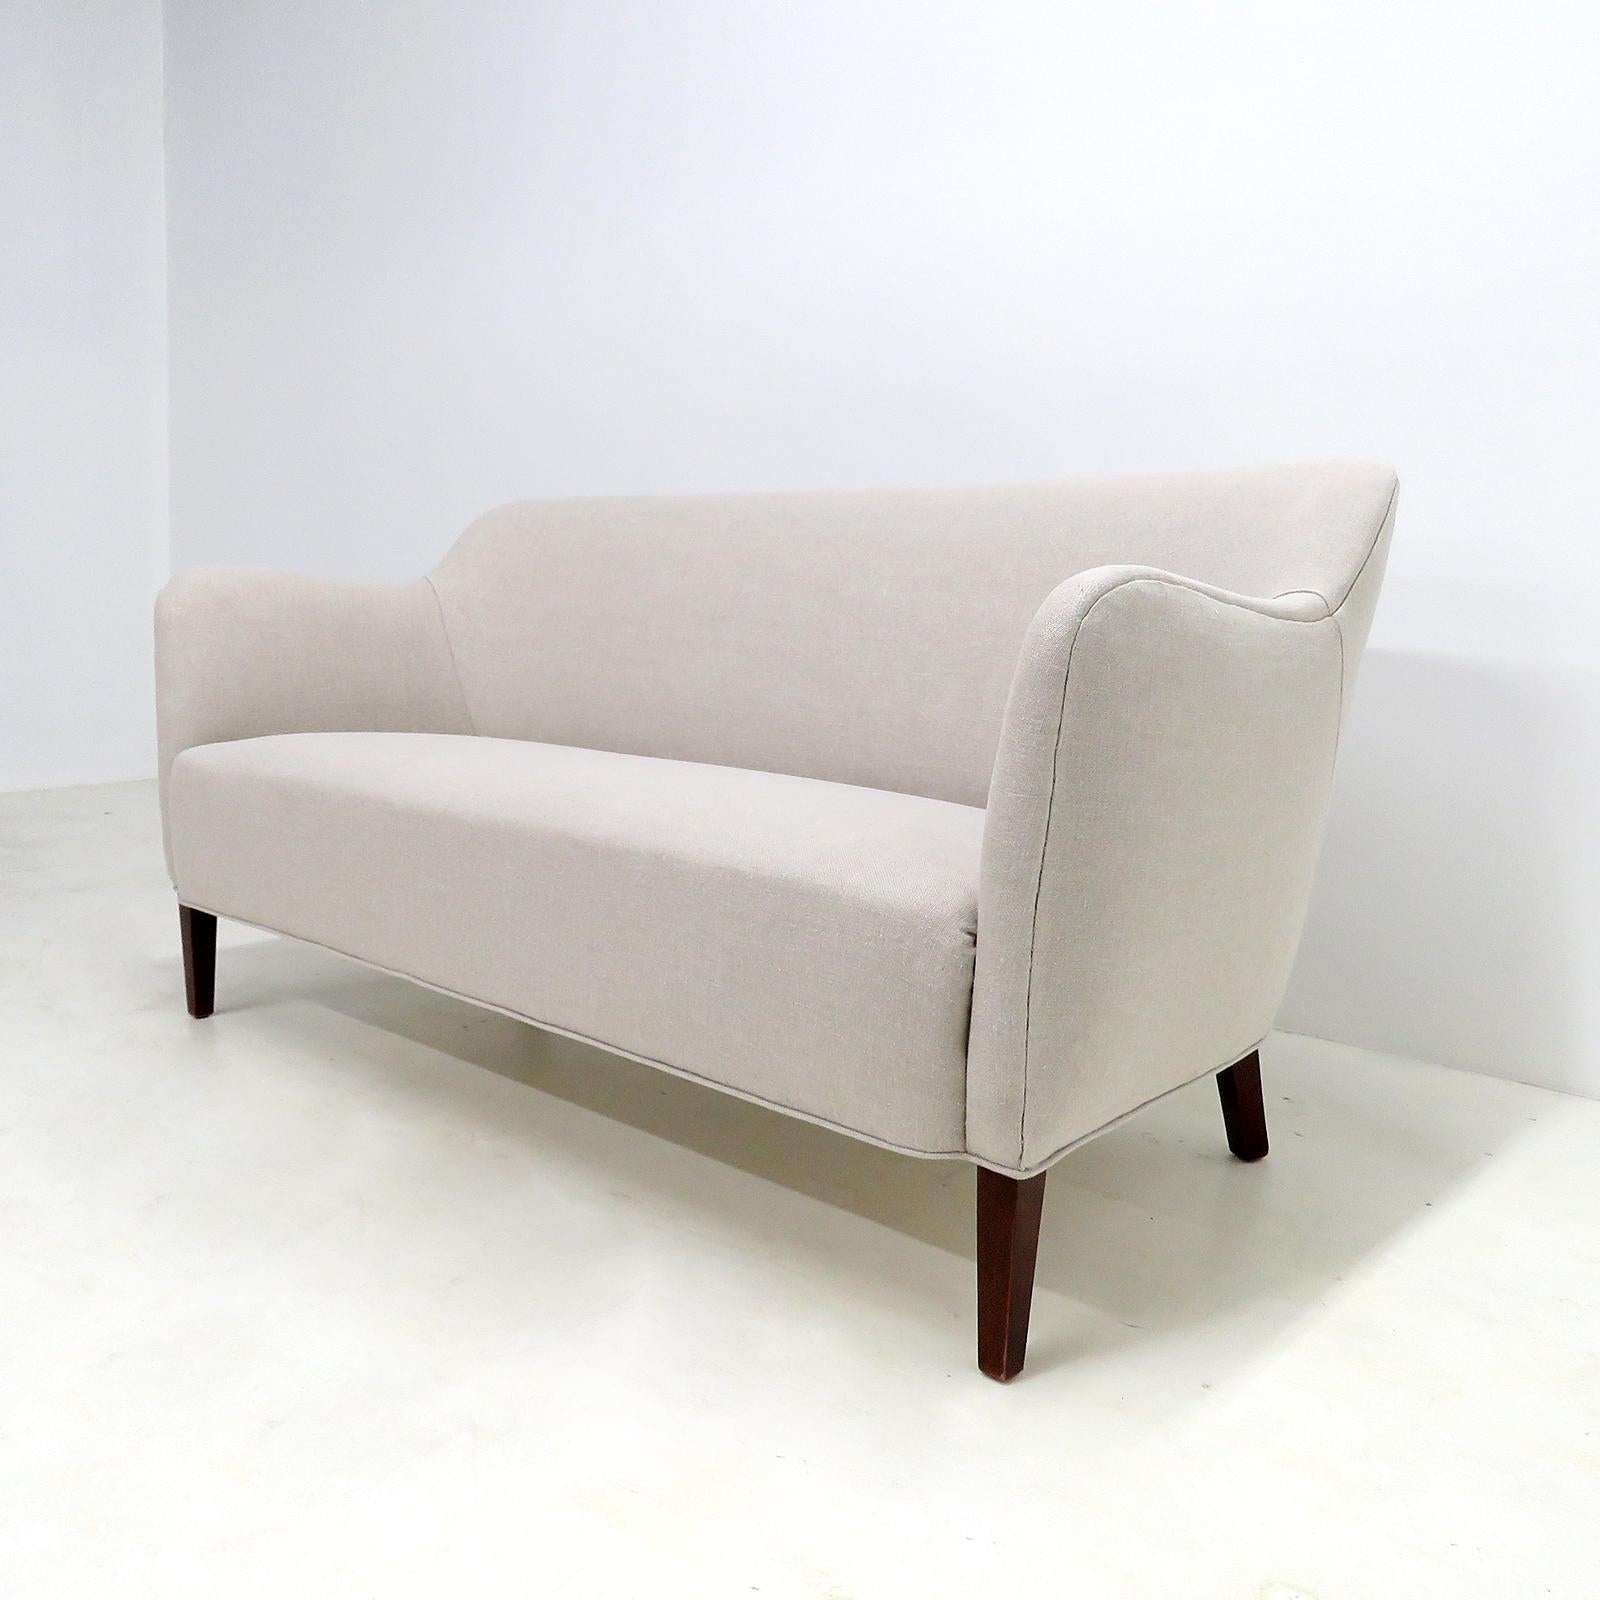 Stained Danish Modern Settee by Jacob Kjaer, 1940